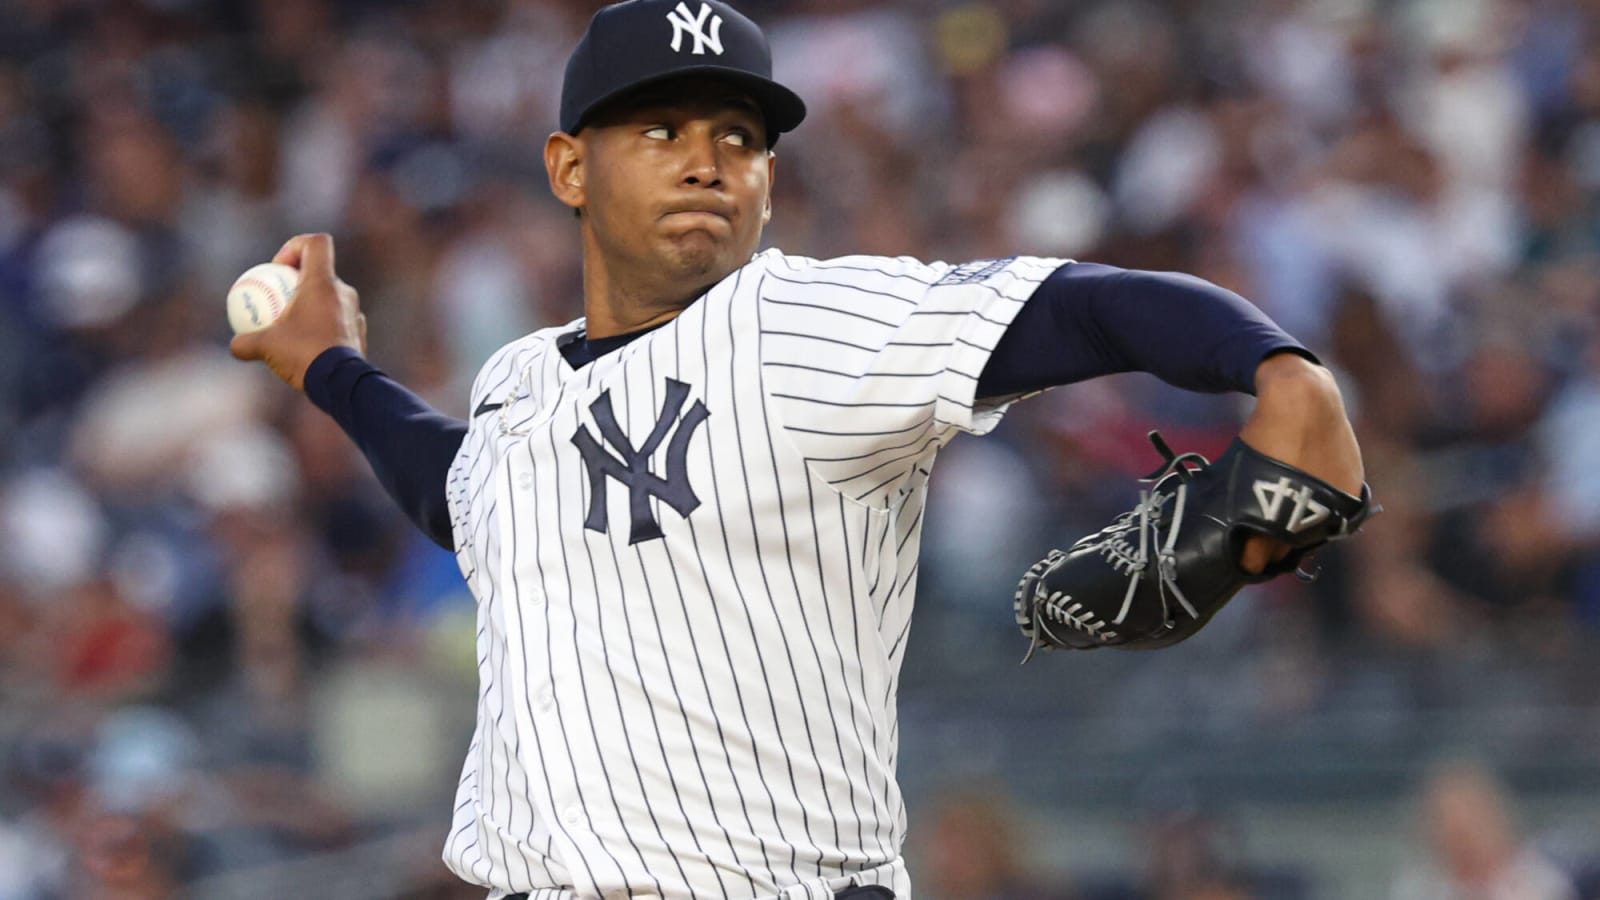 The Yankees could make young promising starter their new 5th starter